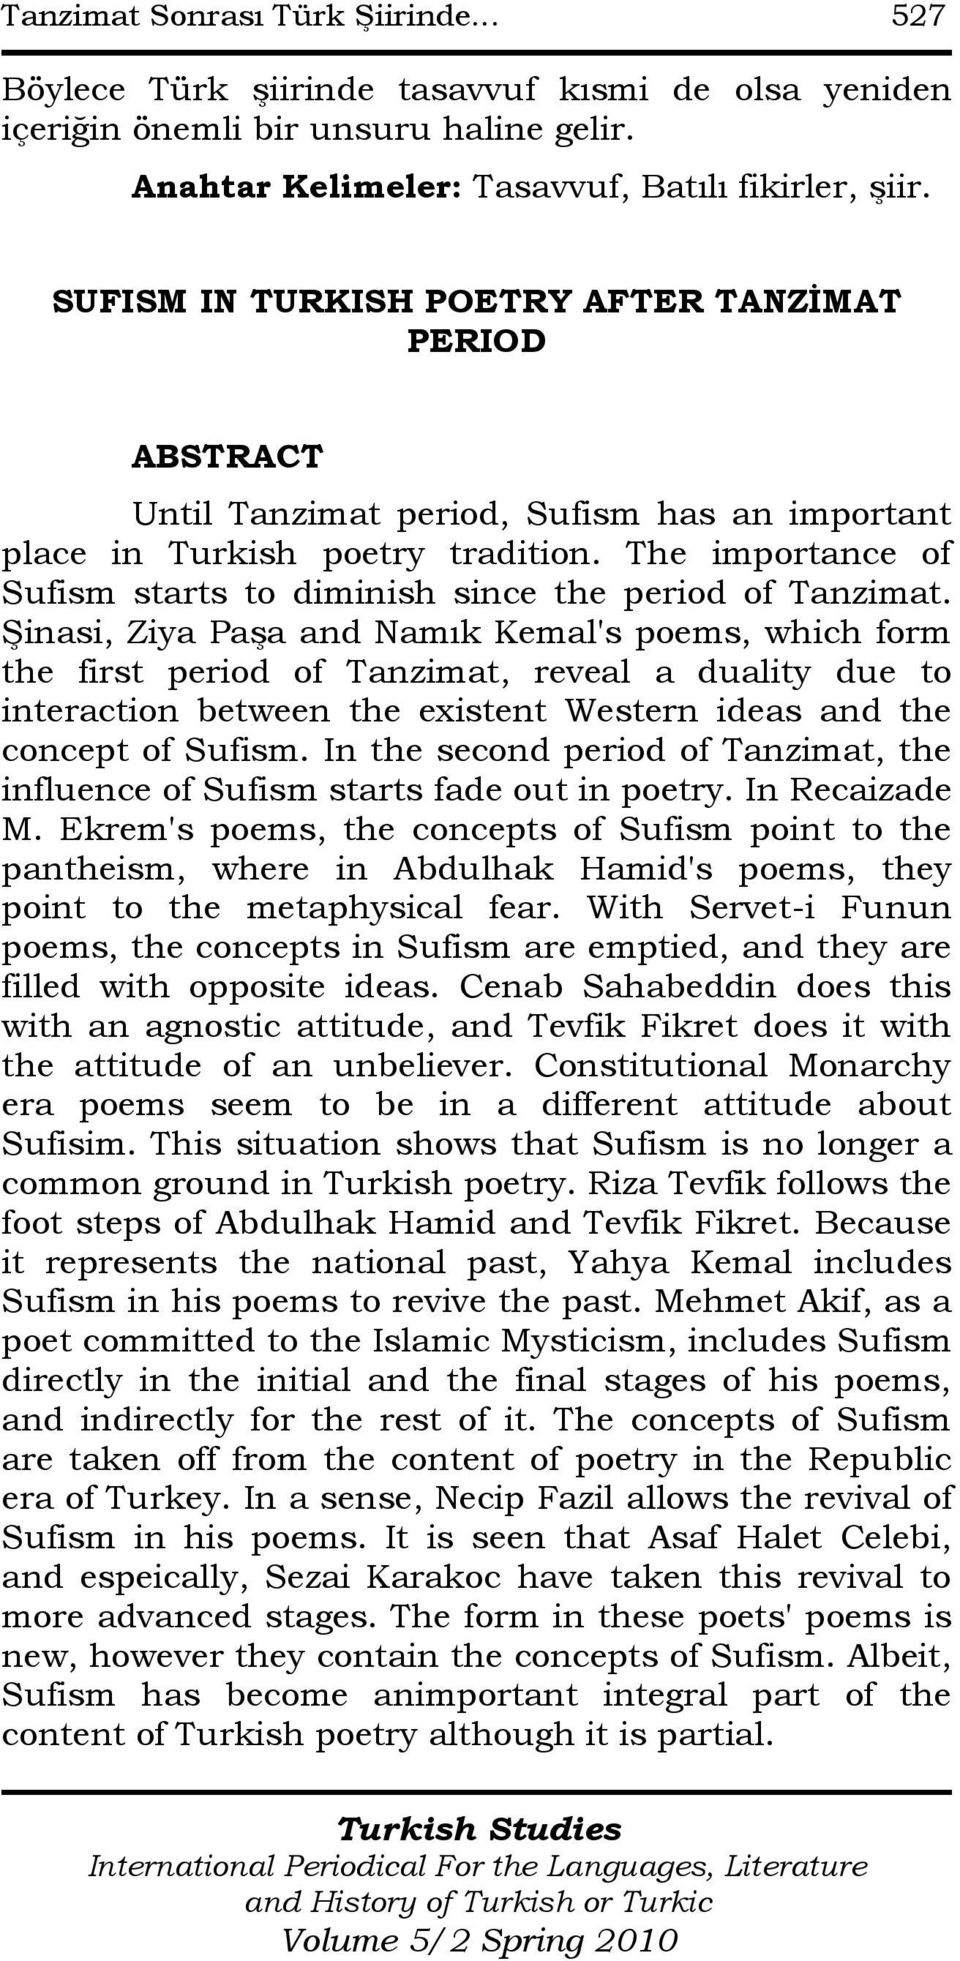 The importance of Sufism starts to diminish since the period of Tanzimat.